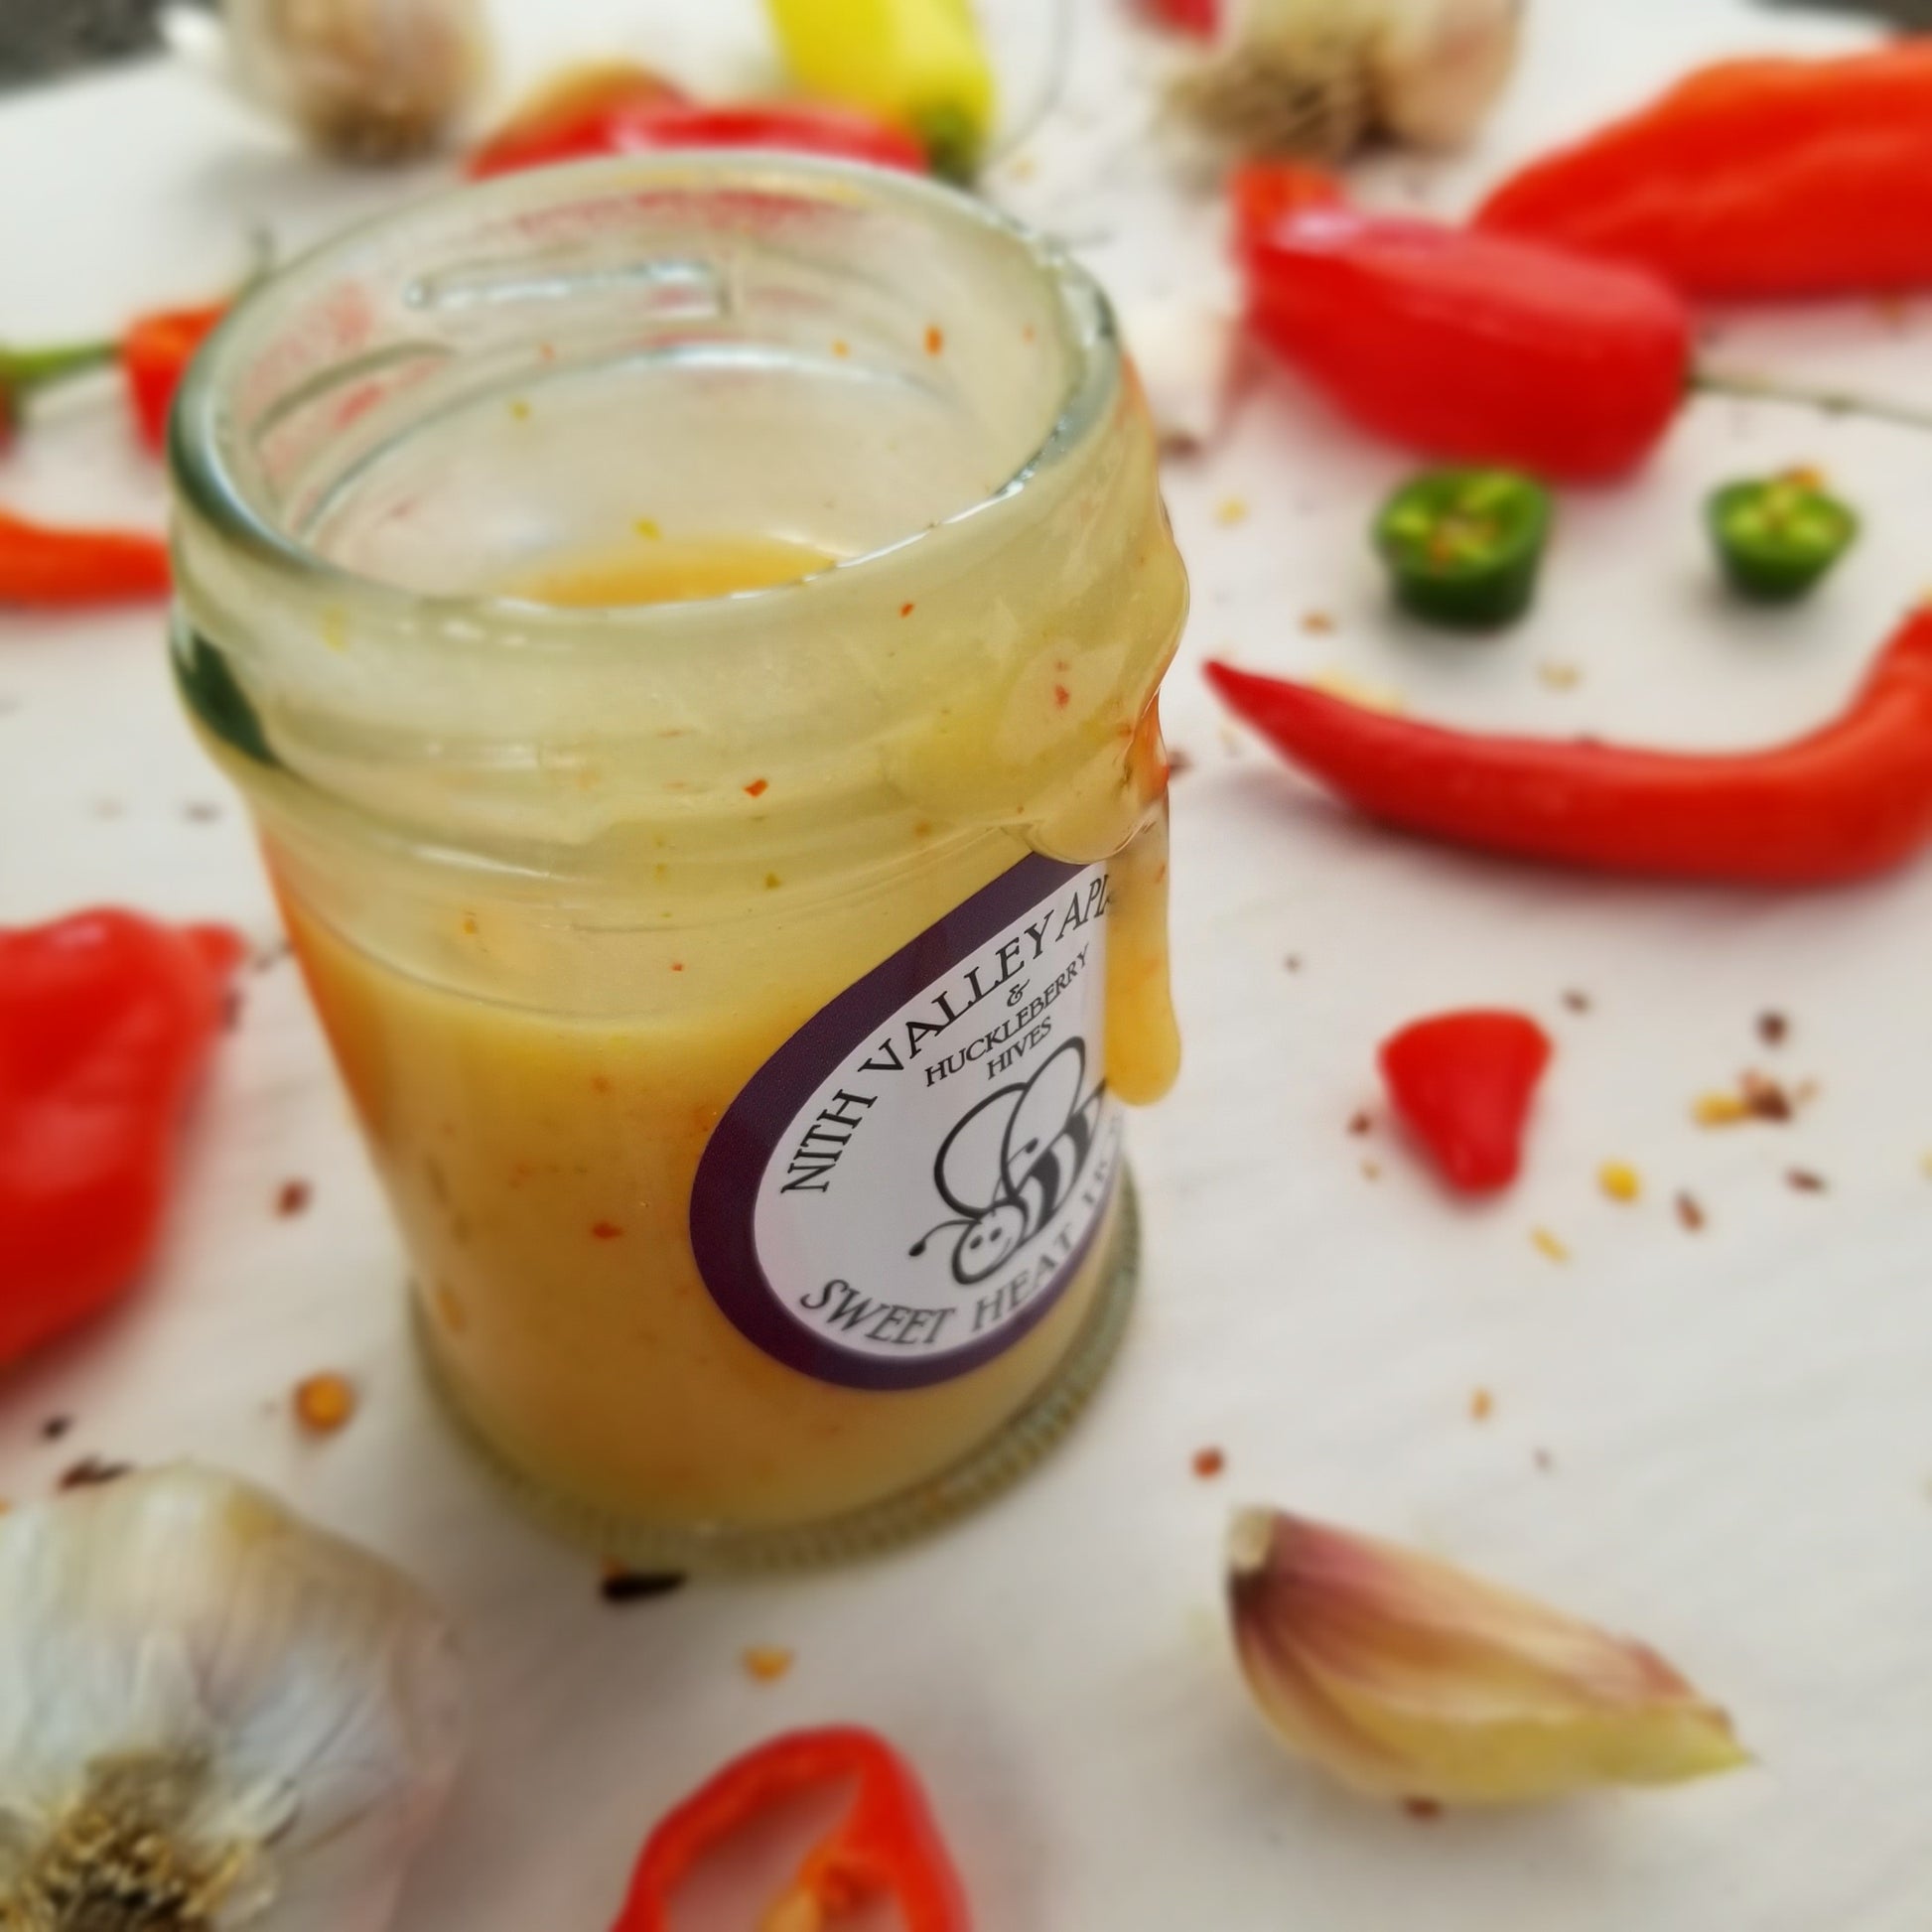 Sweet Heat Honey 90g Jar opened with a honey drizzle. Garlic and hot peppers artfully arranged in the background.